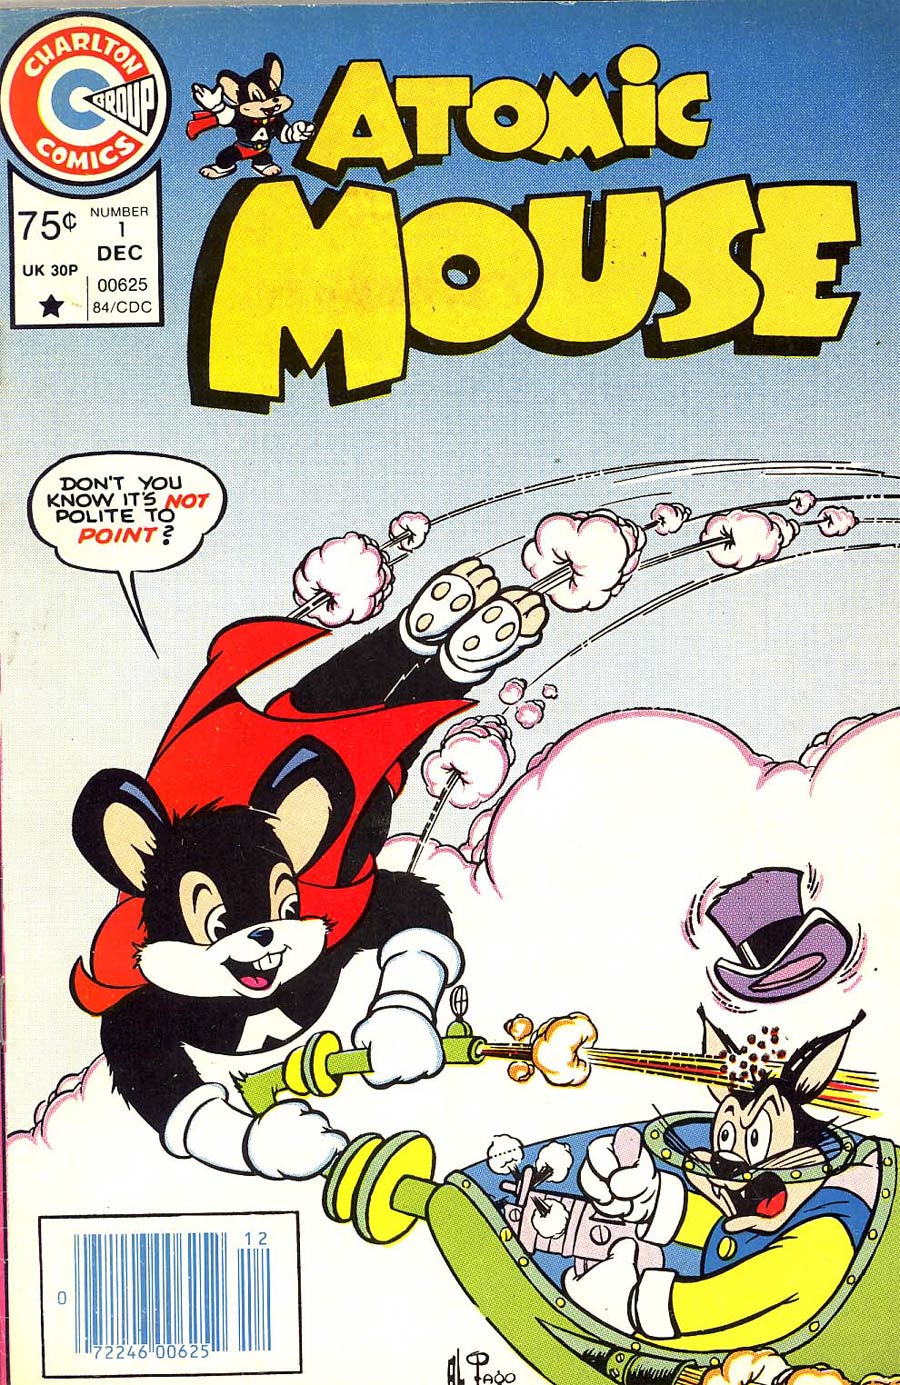 Atomic Mouse (TV/Movies 1984) #1